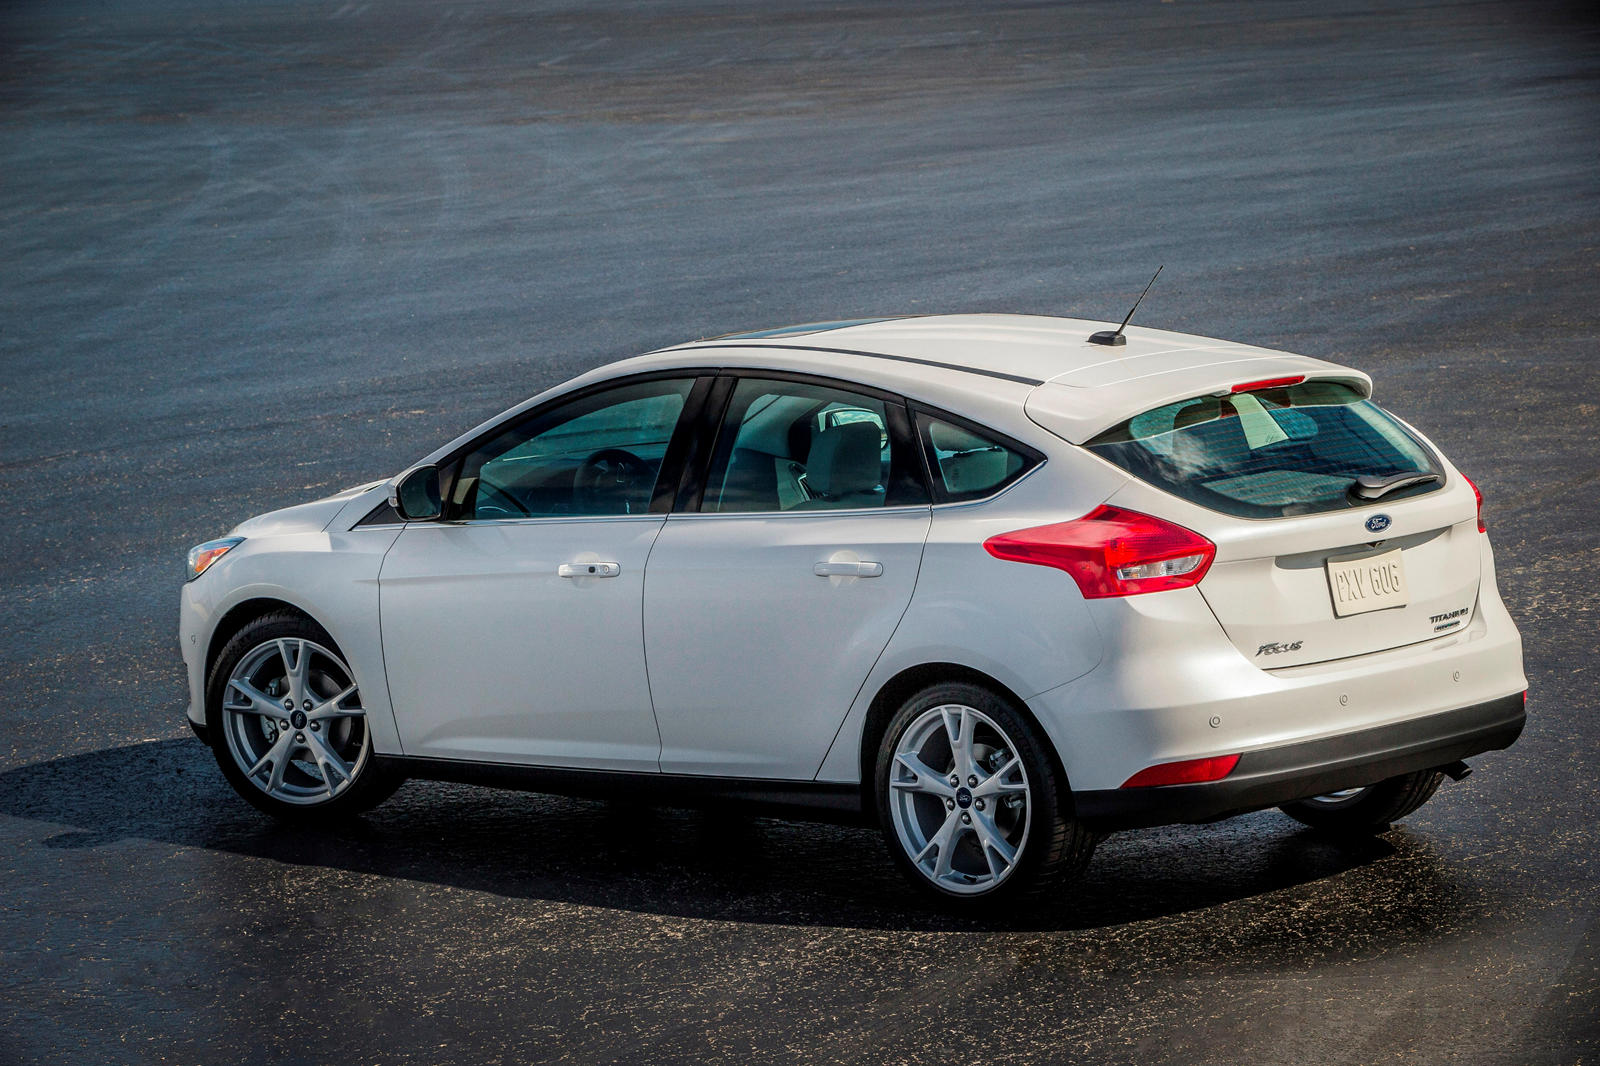 2018 Ford Focus Hatchback: Review, Trims, Specs, Price, New Interior ...